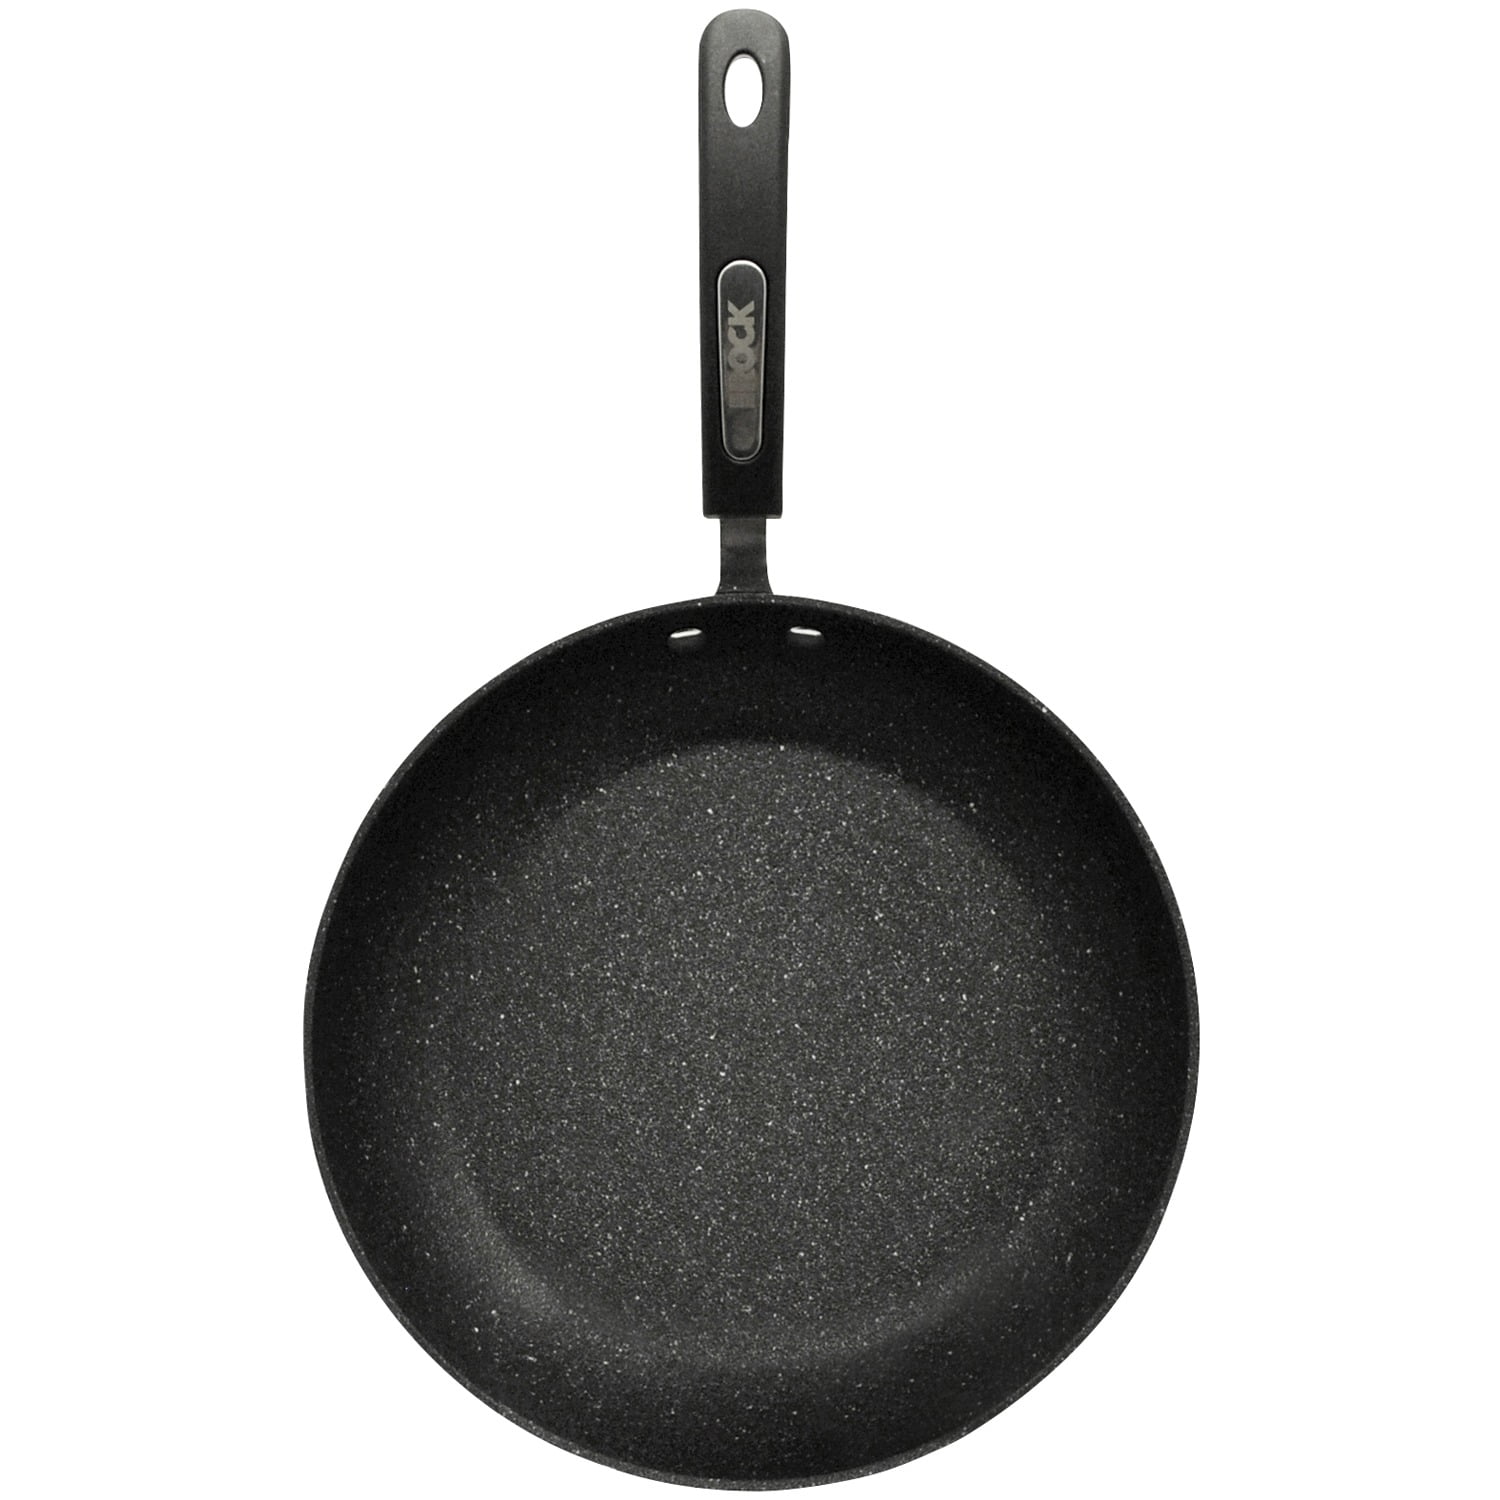  Starfrit The Rock 6.5 Fry Pan, S/S Wire Handle  030949-006-0000: Home & Kitchen